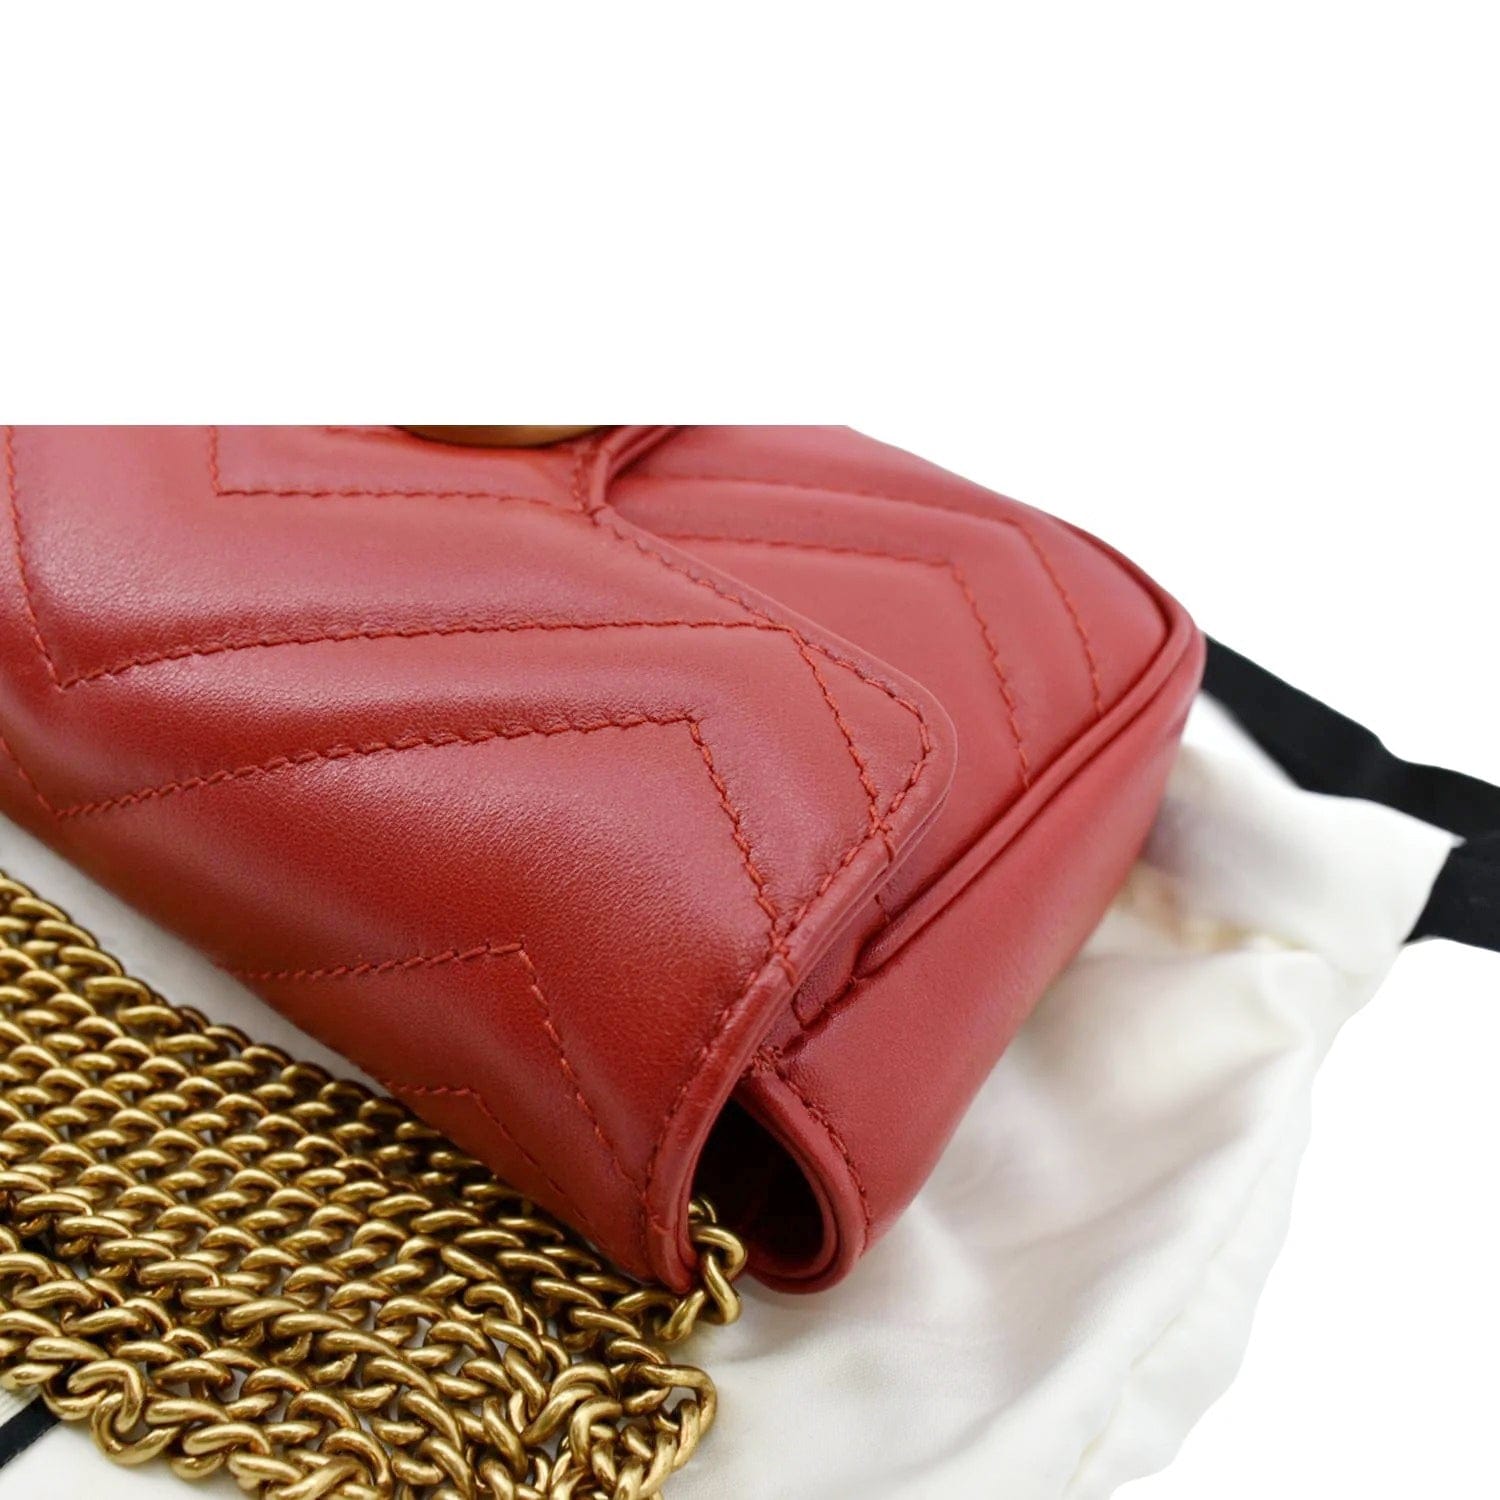 GUCCI MINI MARMONT WALLET ON gold CHAIN RED SHOULDER Handbag Purse